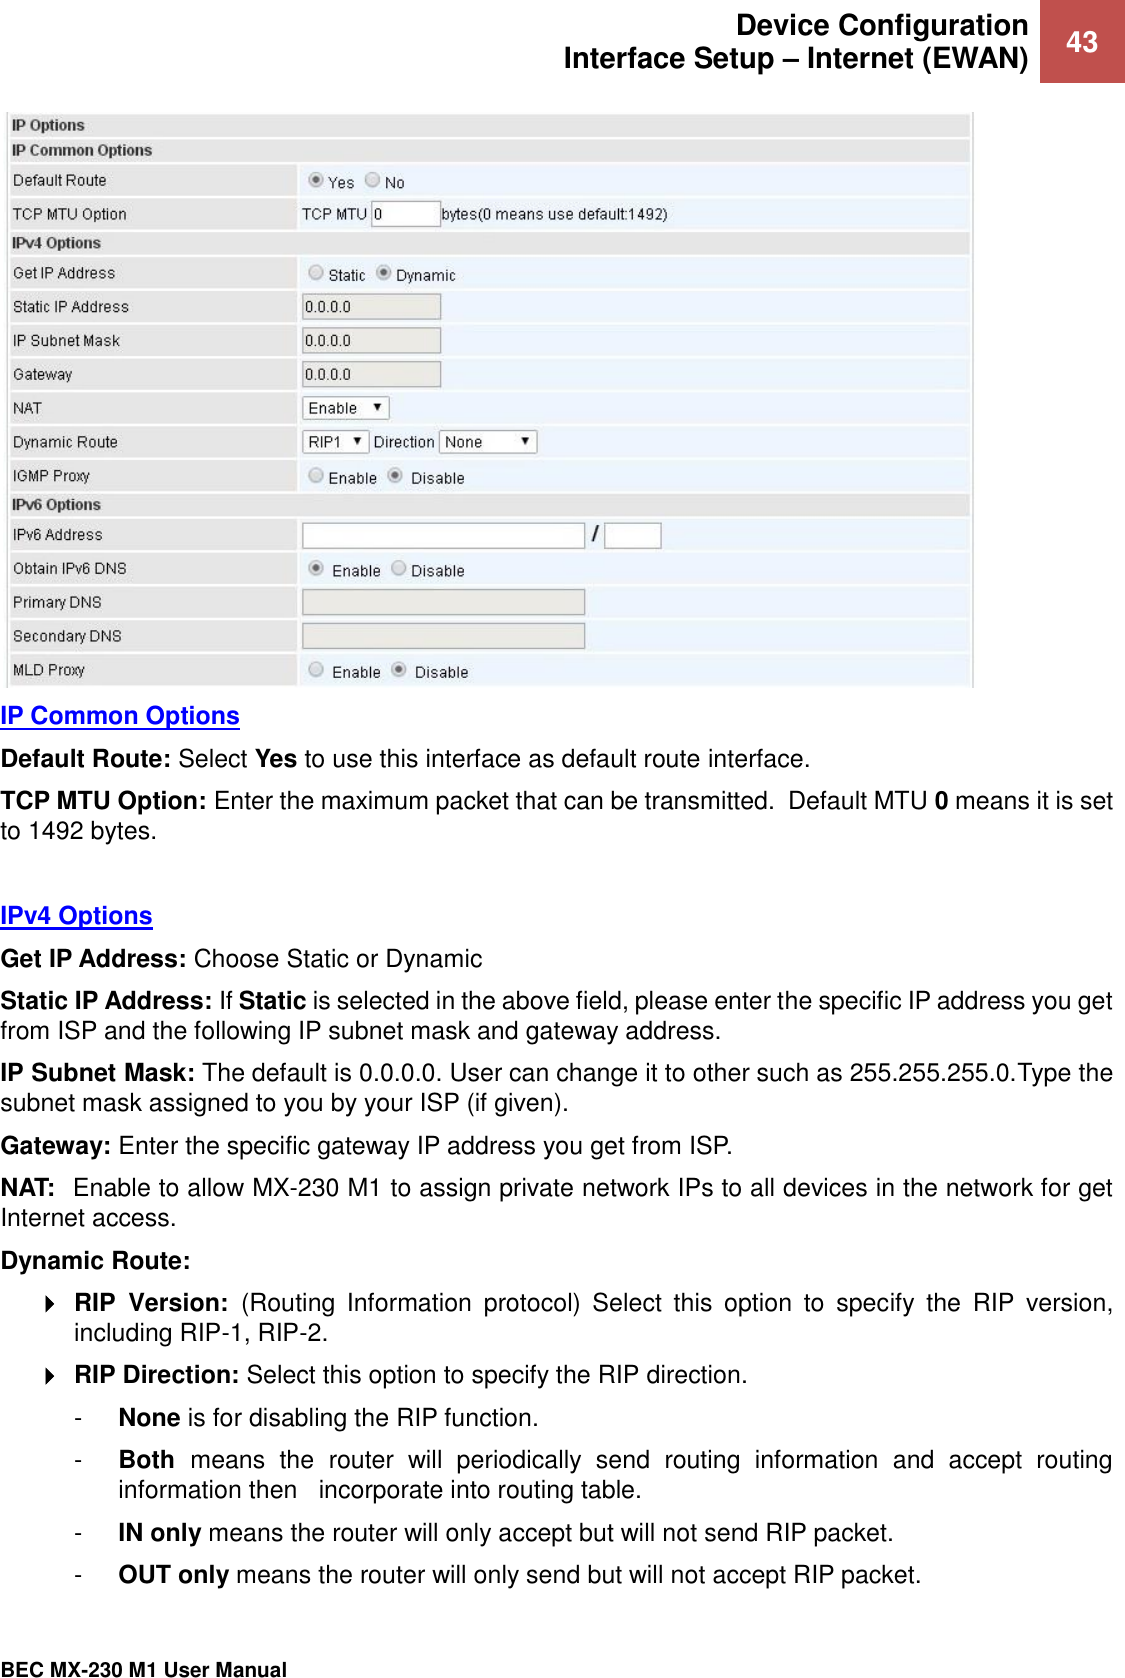 Device Configuration Interface Setup – Internet (EWAN) 43   BEC MX-230 M1 User Manual   IP Common Options Default Route: Select Yes to use this interface as default route interface. TCP MTU Option: Enter the maximum packet that can be transmitted.  Default MTU 0 means it is set to 1492 bytes.    IPv4 Options Get IP Address: Choose Static or Dynamic Static IP Address: If Static is selected in the above field, please enter the specific IP address you get from ISP and the following IP subnet mask and gateway address. IP Subnet Mask: The default is 0.0.0.0. User can change it to other such as 255.255.255.0.Type the subnet mask assigned to you by your ISP (if given). Gateway: Enter the specific gateway IP address you get from ISP. NAT:  Enable to allow MX-230 M1 to assign private network IPs to all devices in the network for get Internet access. Dynamic Route:   RIP  Version:  (Routing  Information  protocol)  Select  this  option  to  specify  the  RIP  version, including RIP-1, RIP-2.   RIP Direction: Select this option to specify the RIP direction.  -  None is for disabling the RIP function.  -  Both  means  the  router  will  periodically  send  routing  information  and  accept  routing information then   incorporate into routing table.  -  IN only means the router will only accept but will not send RIP packet.  -  OUT only means the router will only send but will not accept RIP packet. 